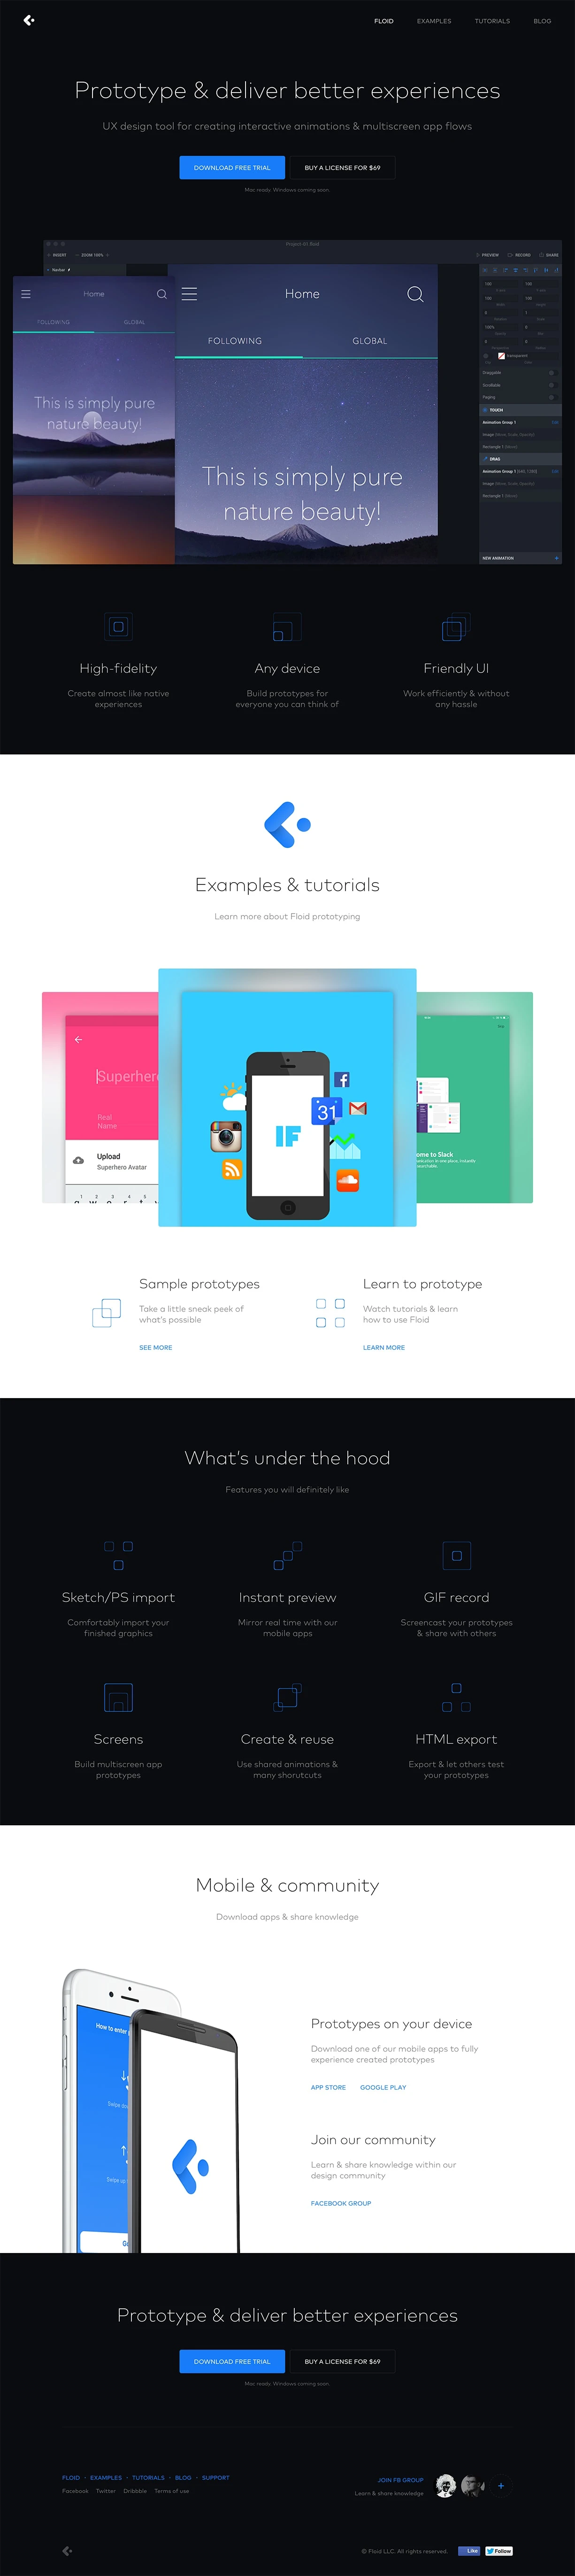 Floid Landing Page Example: UX design tool for creating interactive animations & multiscreen app flows